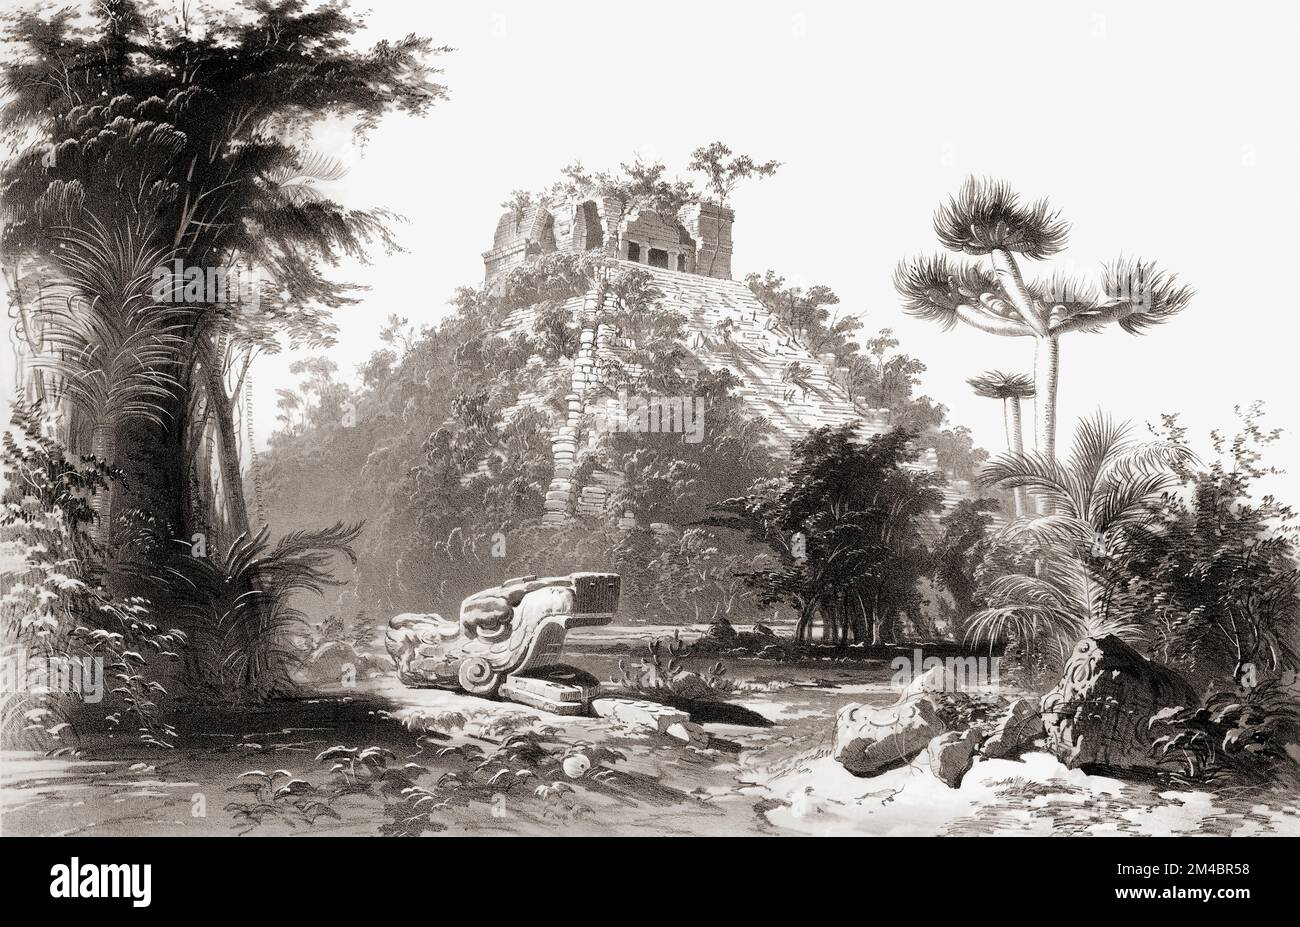 The Mayan temple of Kukulcan, also known as El Castillo at Chichen Itza, Yucatan, Mexico circa 1840.  From Views of Ancient Monuments in Central America: Chiapas and Yucatan by Frederick Catherwood Stock Photo